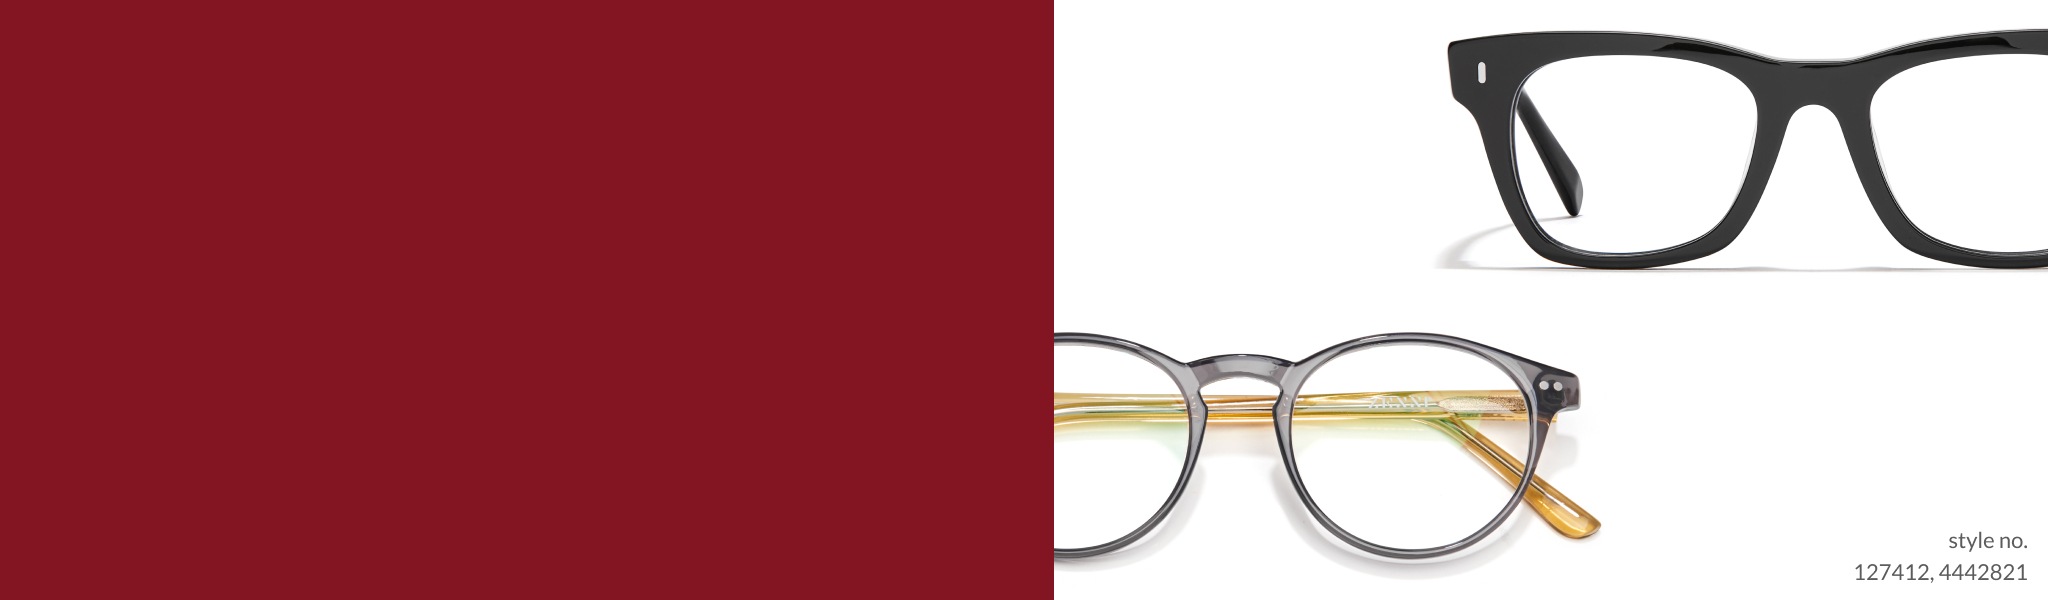 Image of two pairs of glasses, black square glasses #4442821 on the right, and gray round glasses #127412 on the left, displaying with a white background.